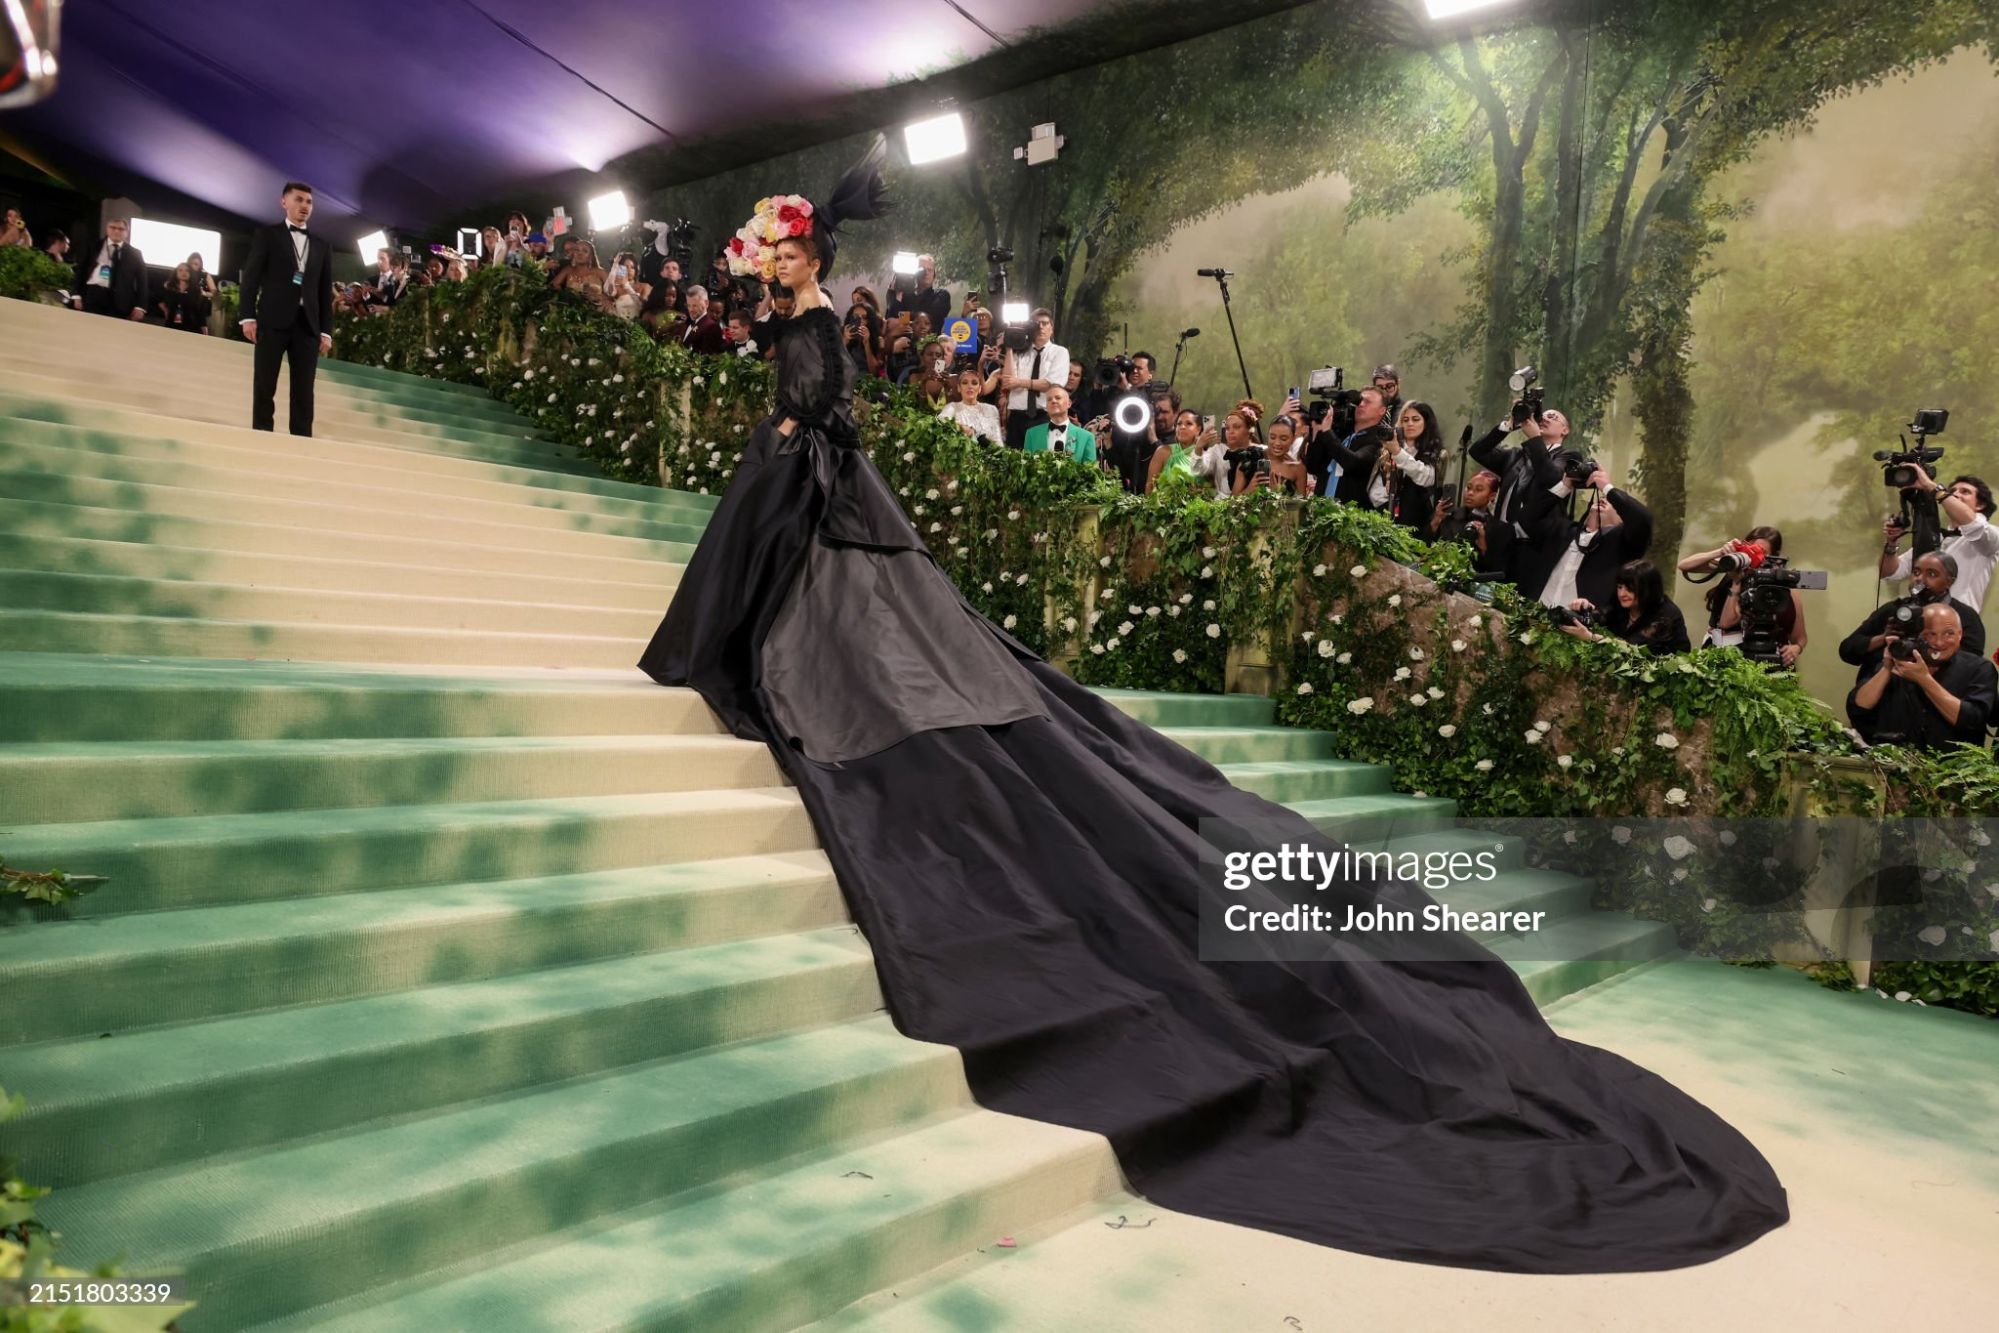 gettyimages-2151803339-2048x2048.jpg